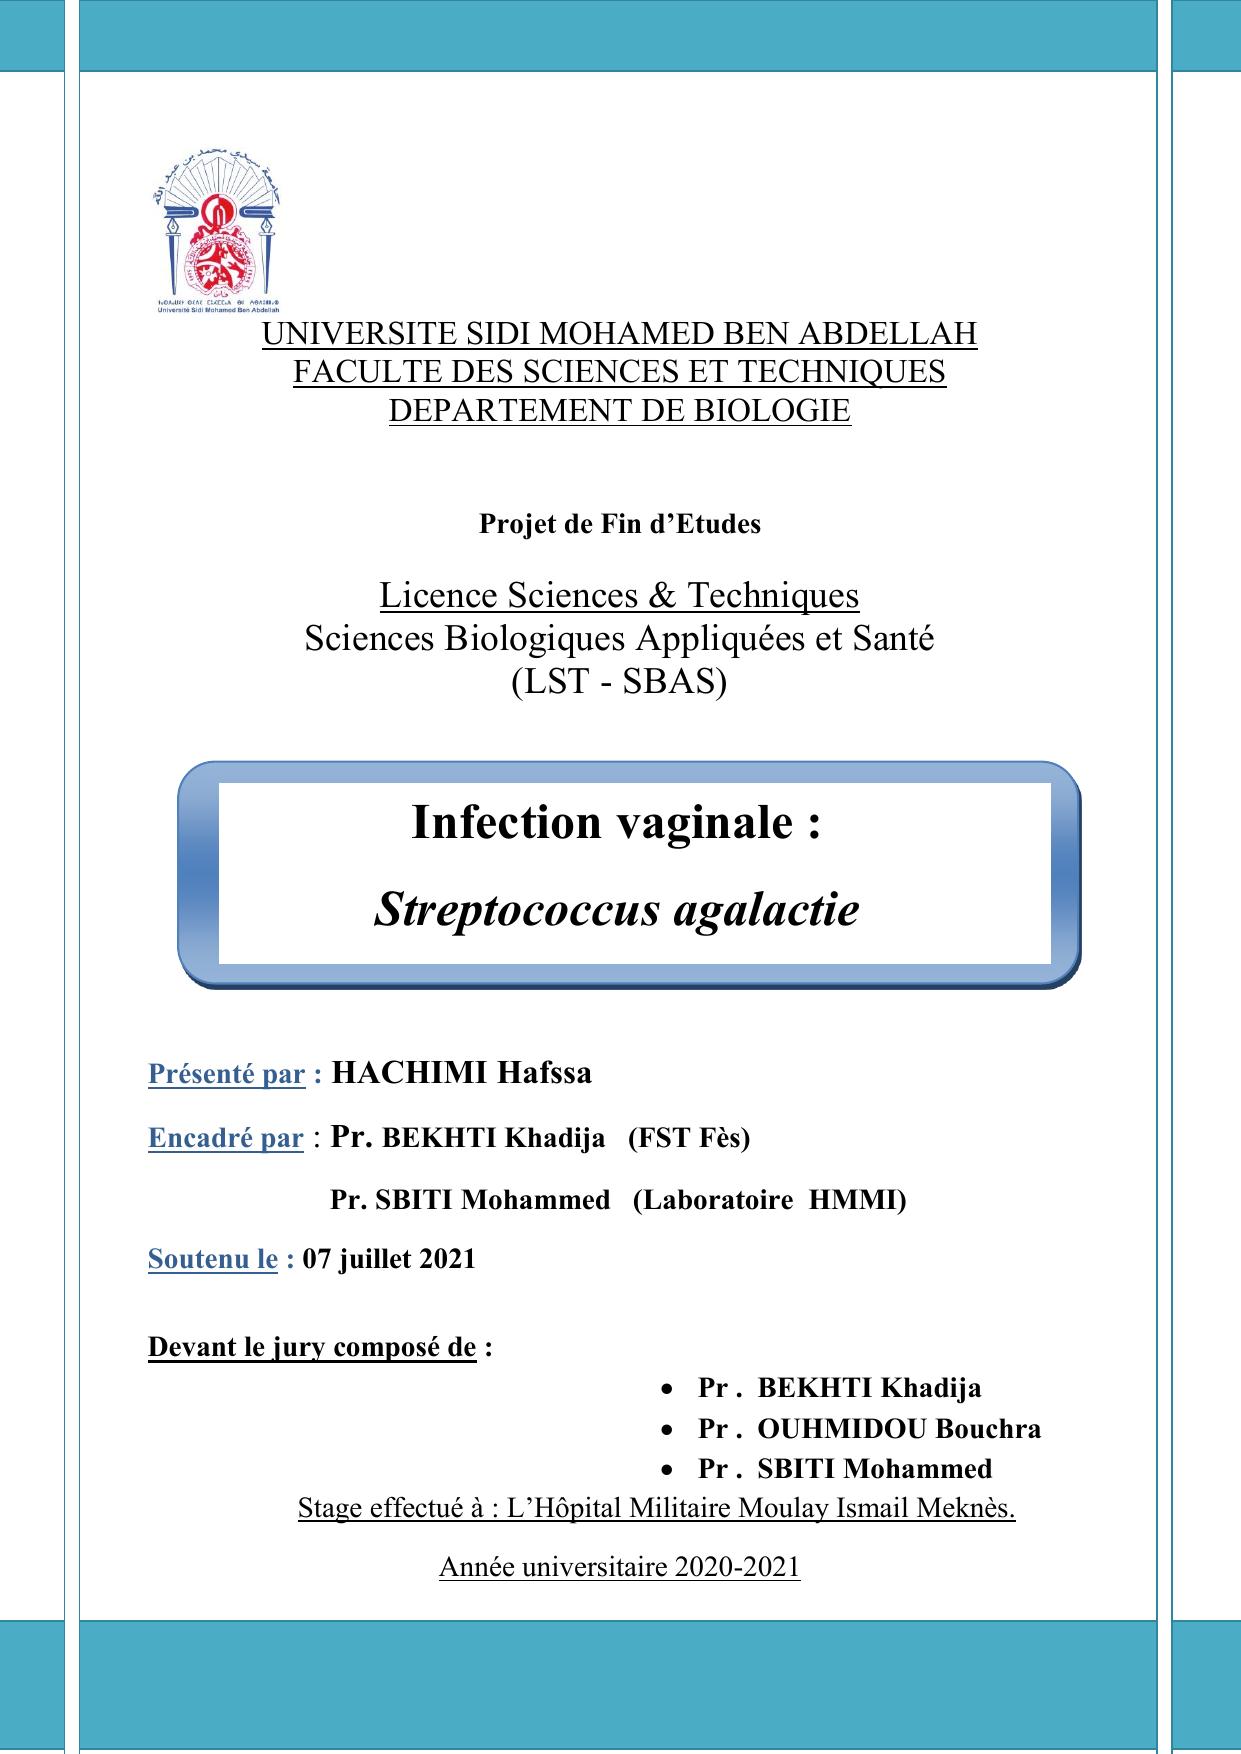 Infection vaginale : Streptococcus agalactie